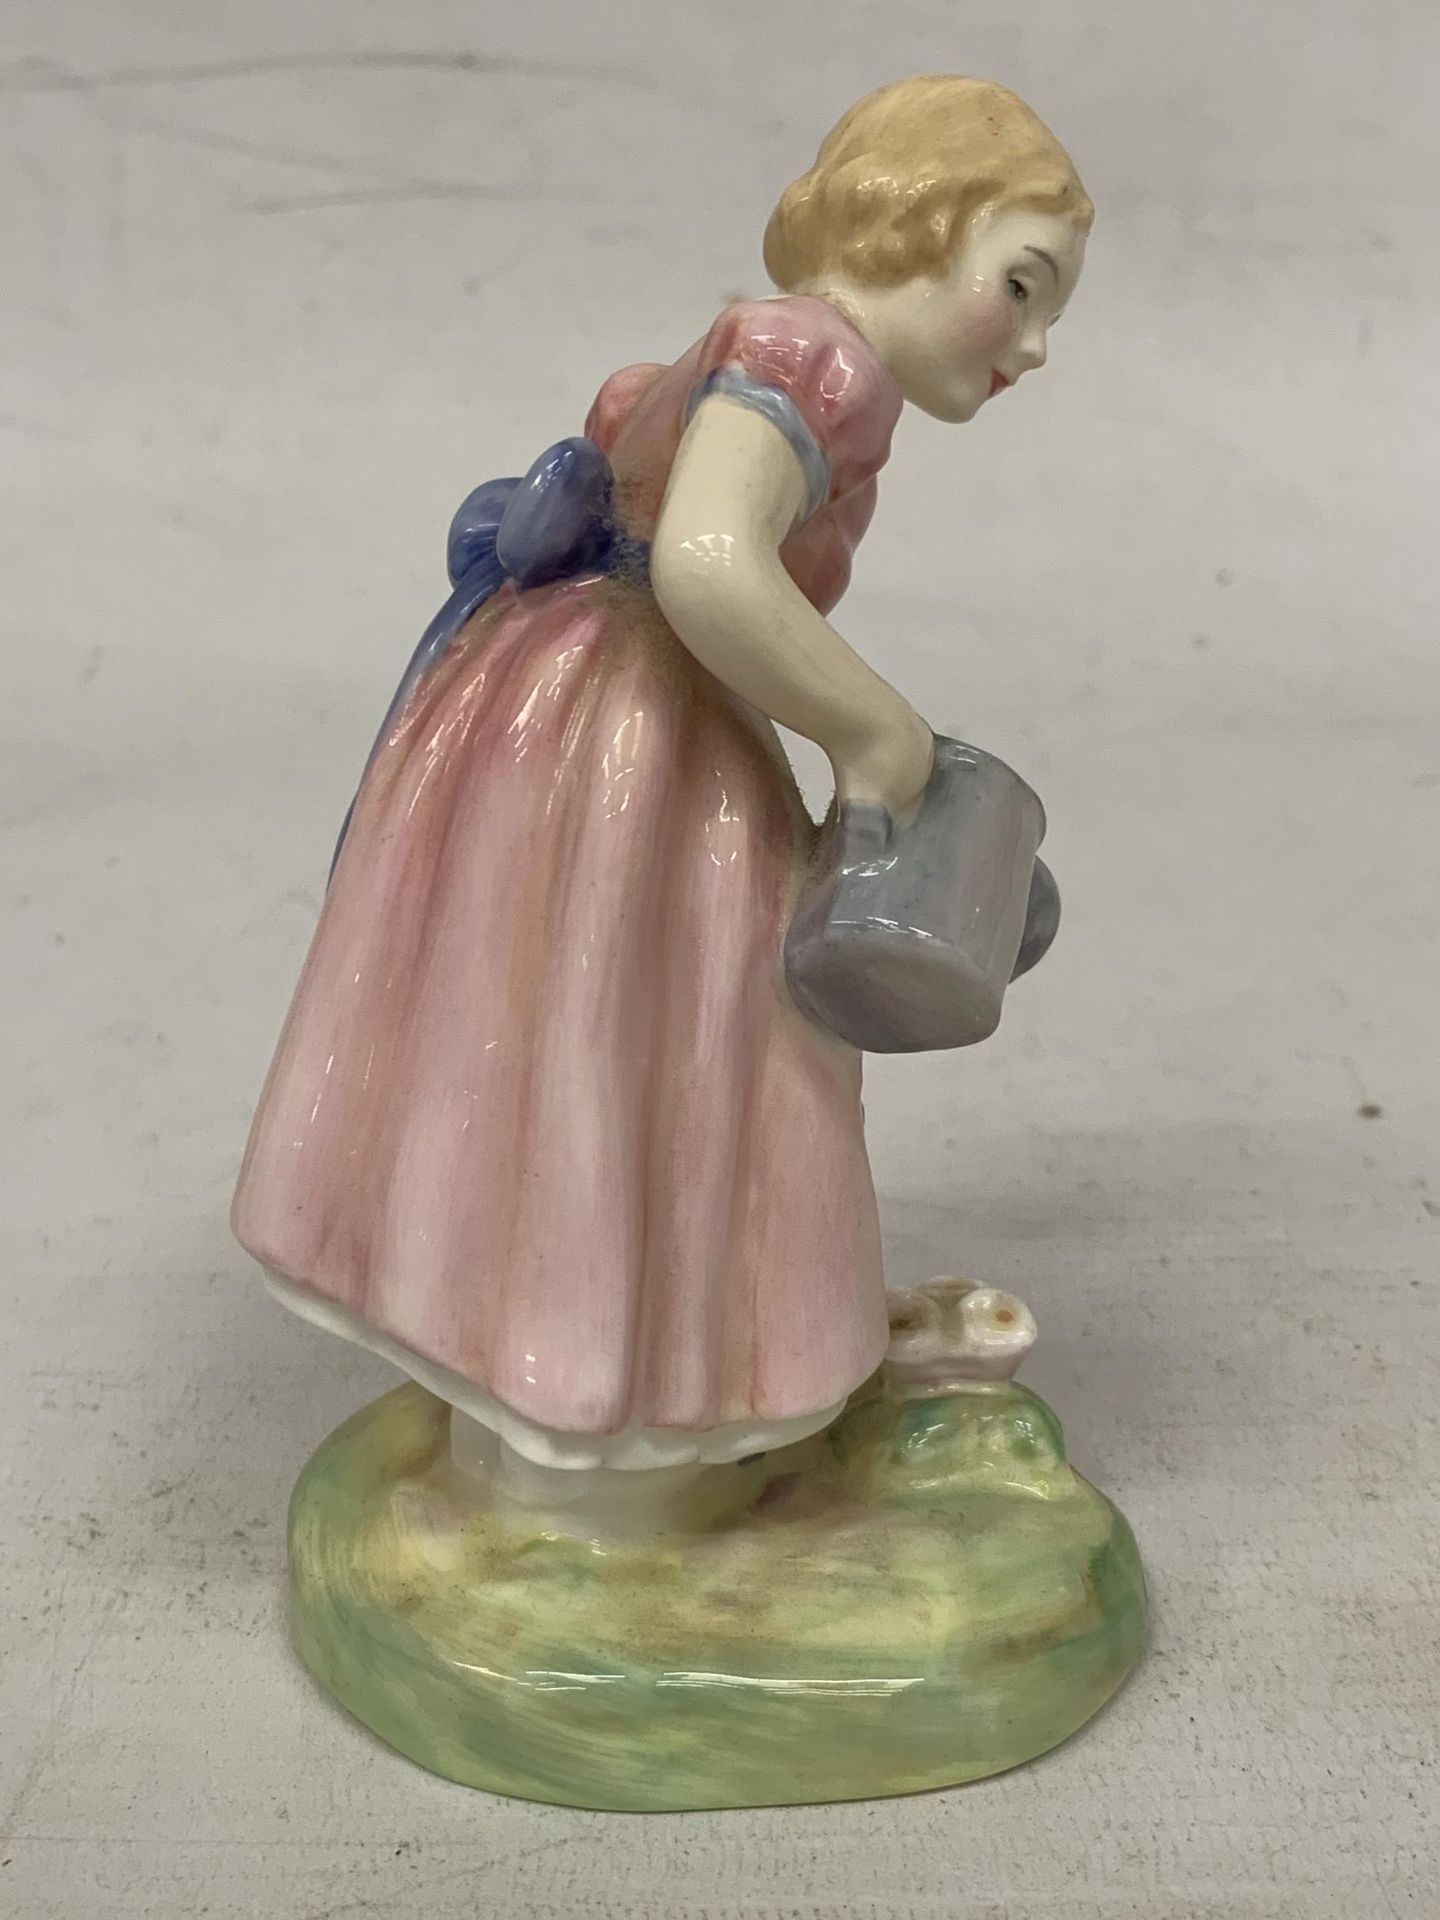 A ROYAL DOULTON FIGURE "MARY MARY" HN 2044 - Image 2 of 4